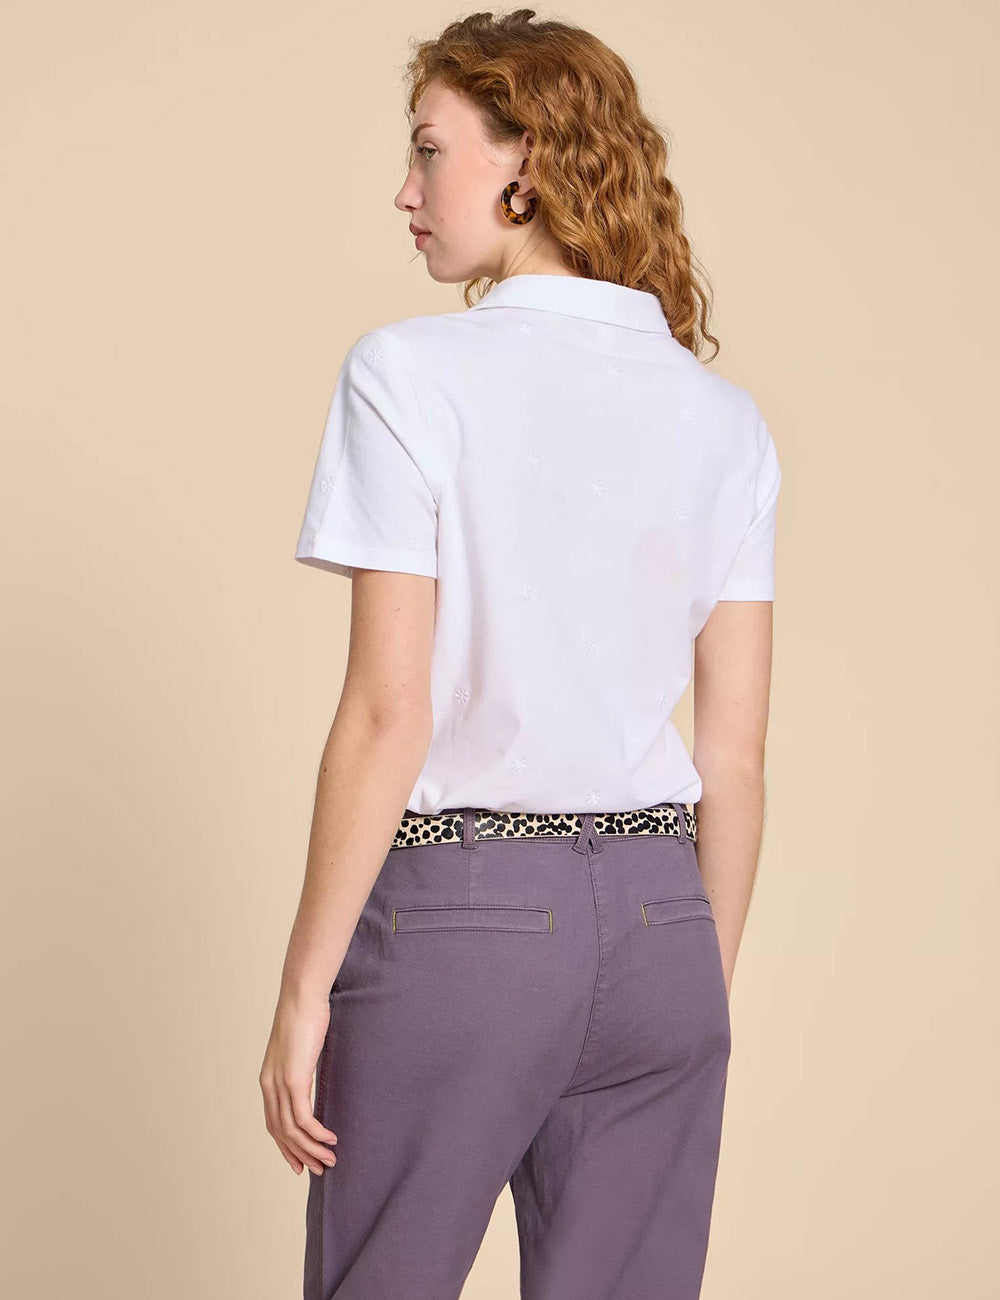 White Stuff Penny Pocket Embroidered Shirt - Pale Ivory